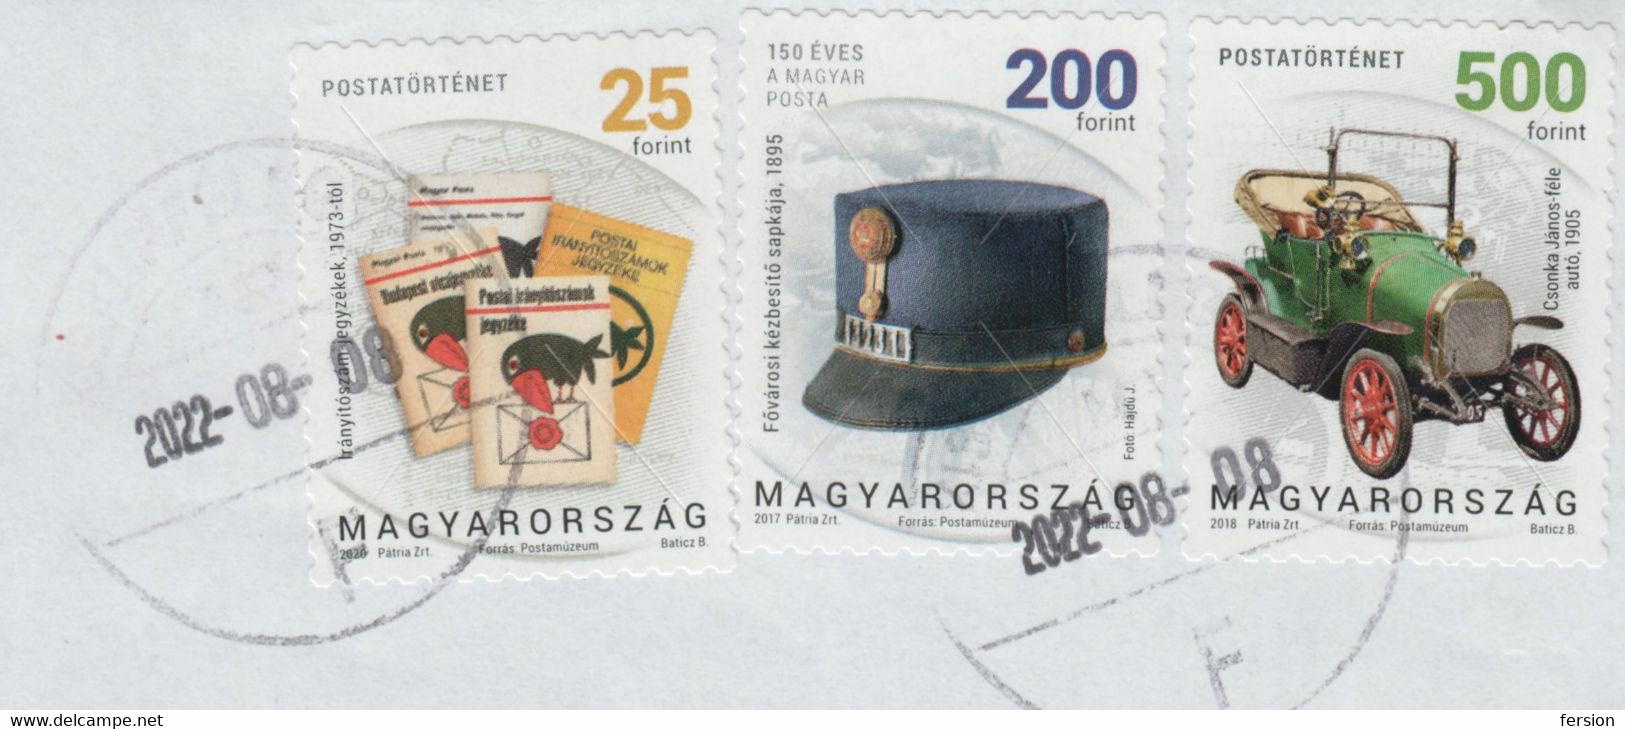 Oldtimer CAR POSTAL HISTORY REGISTERED PRIORITY Label Vignette Forwarded Letter Cover To PO BOX Hungary Pestszentlorinc - Covers & Documents